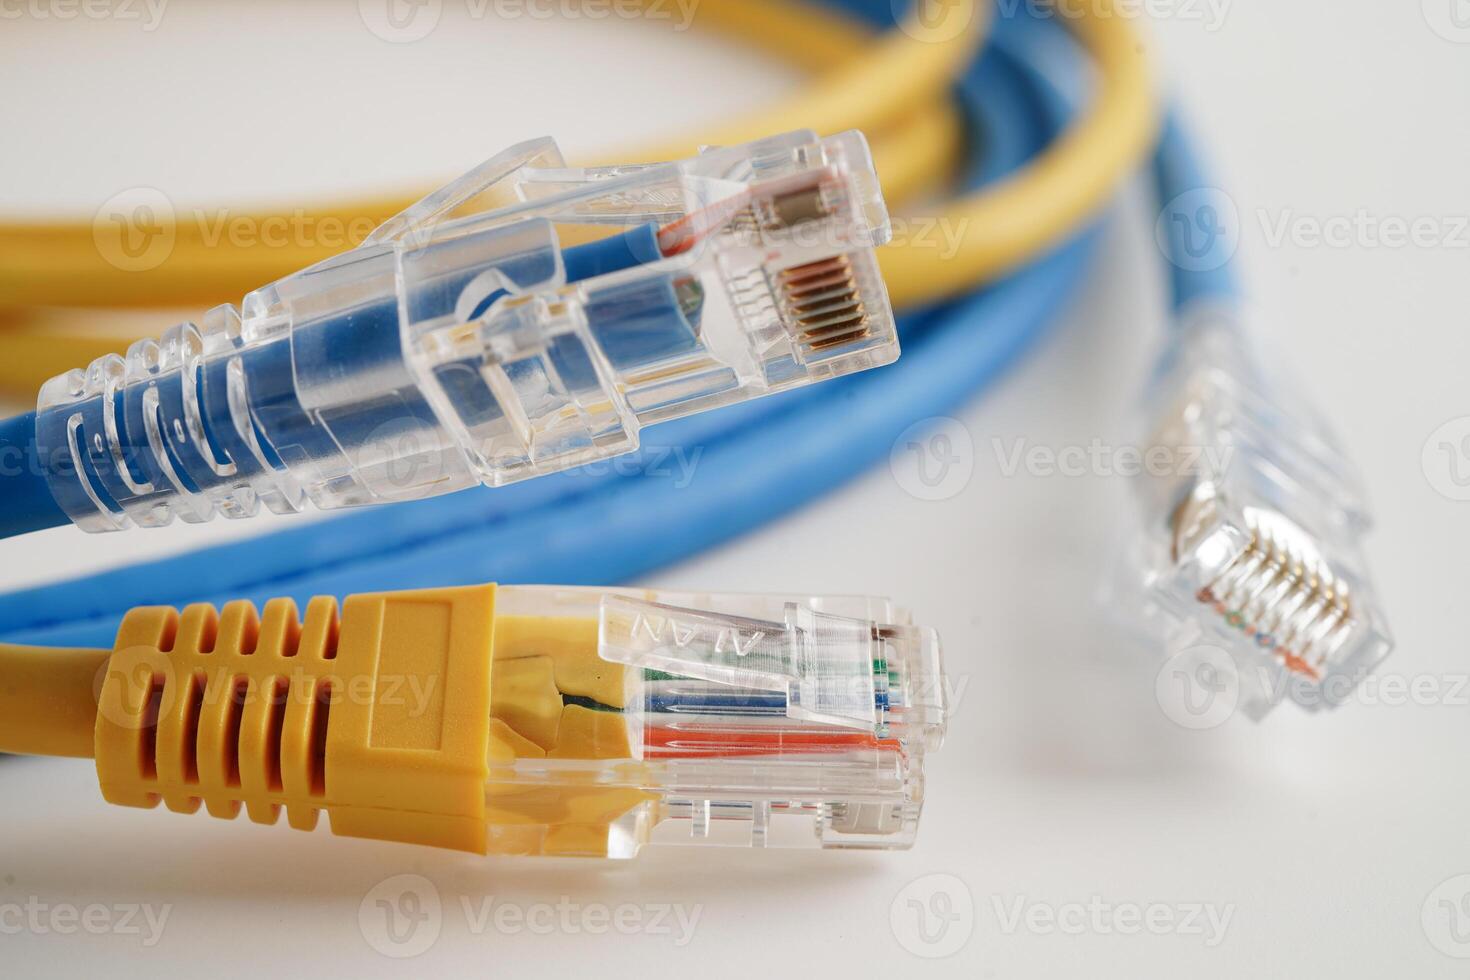 Ethernet cable for connect to wireless router link to internet service provider network. photo